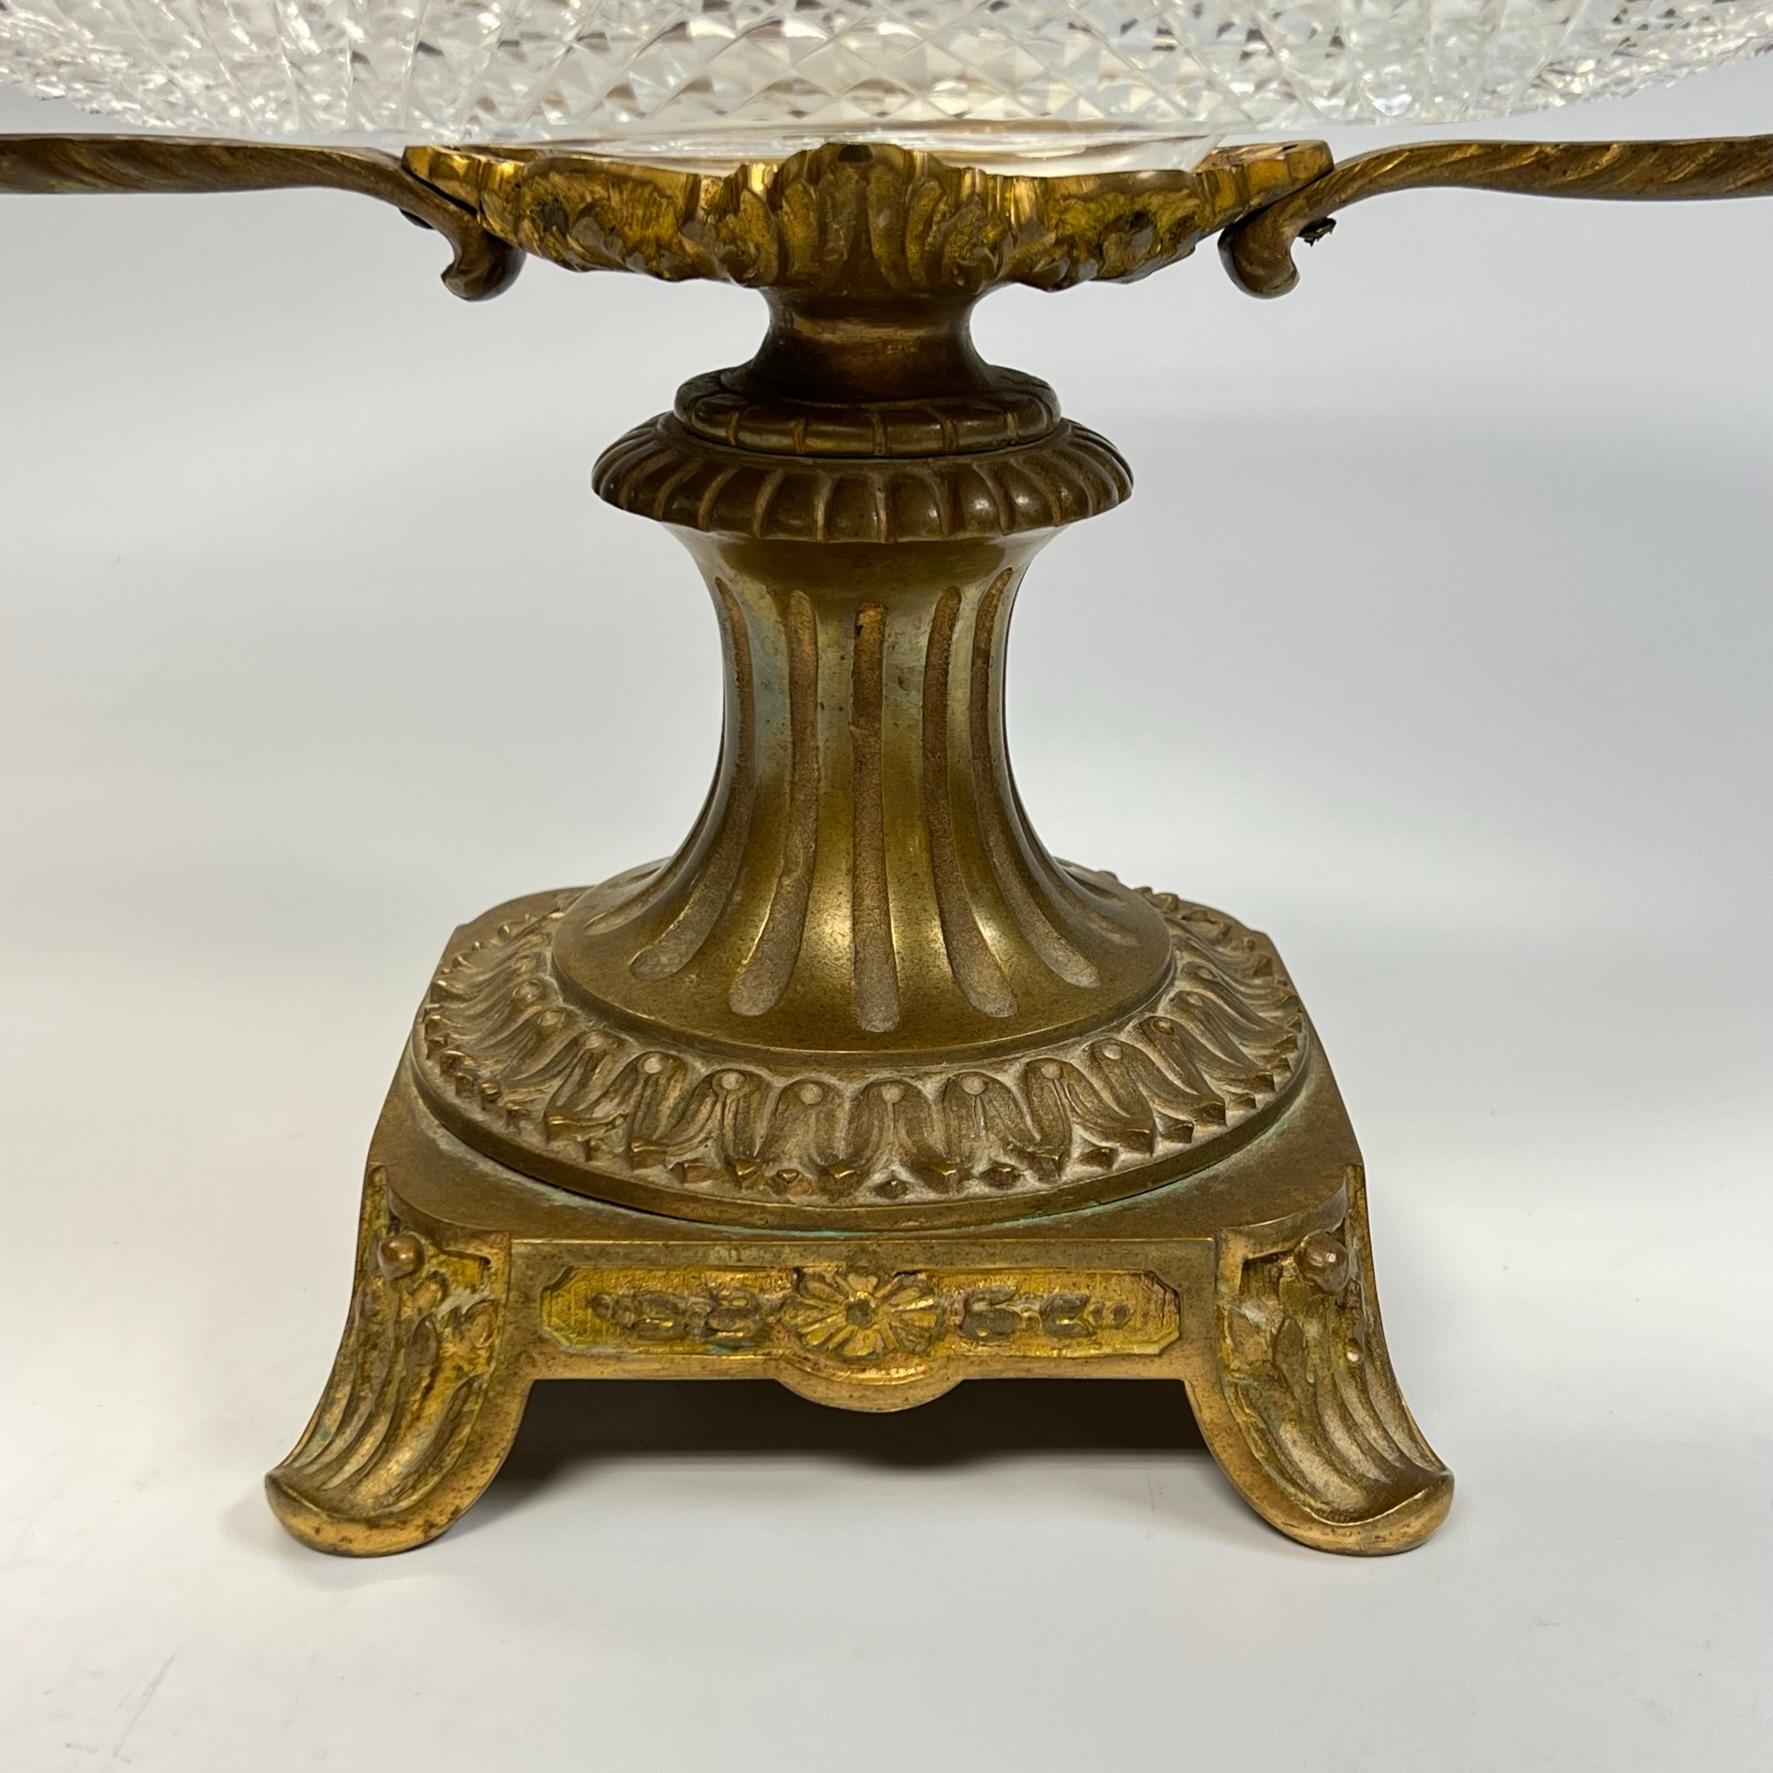 Neoclassical Revival Antique Cut Glass and Bronze Centerpiece Bowl For Sale